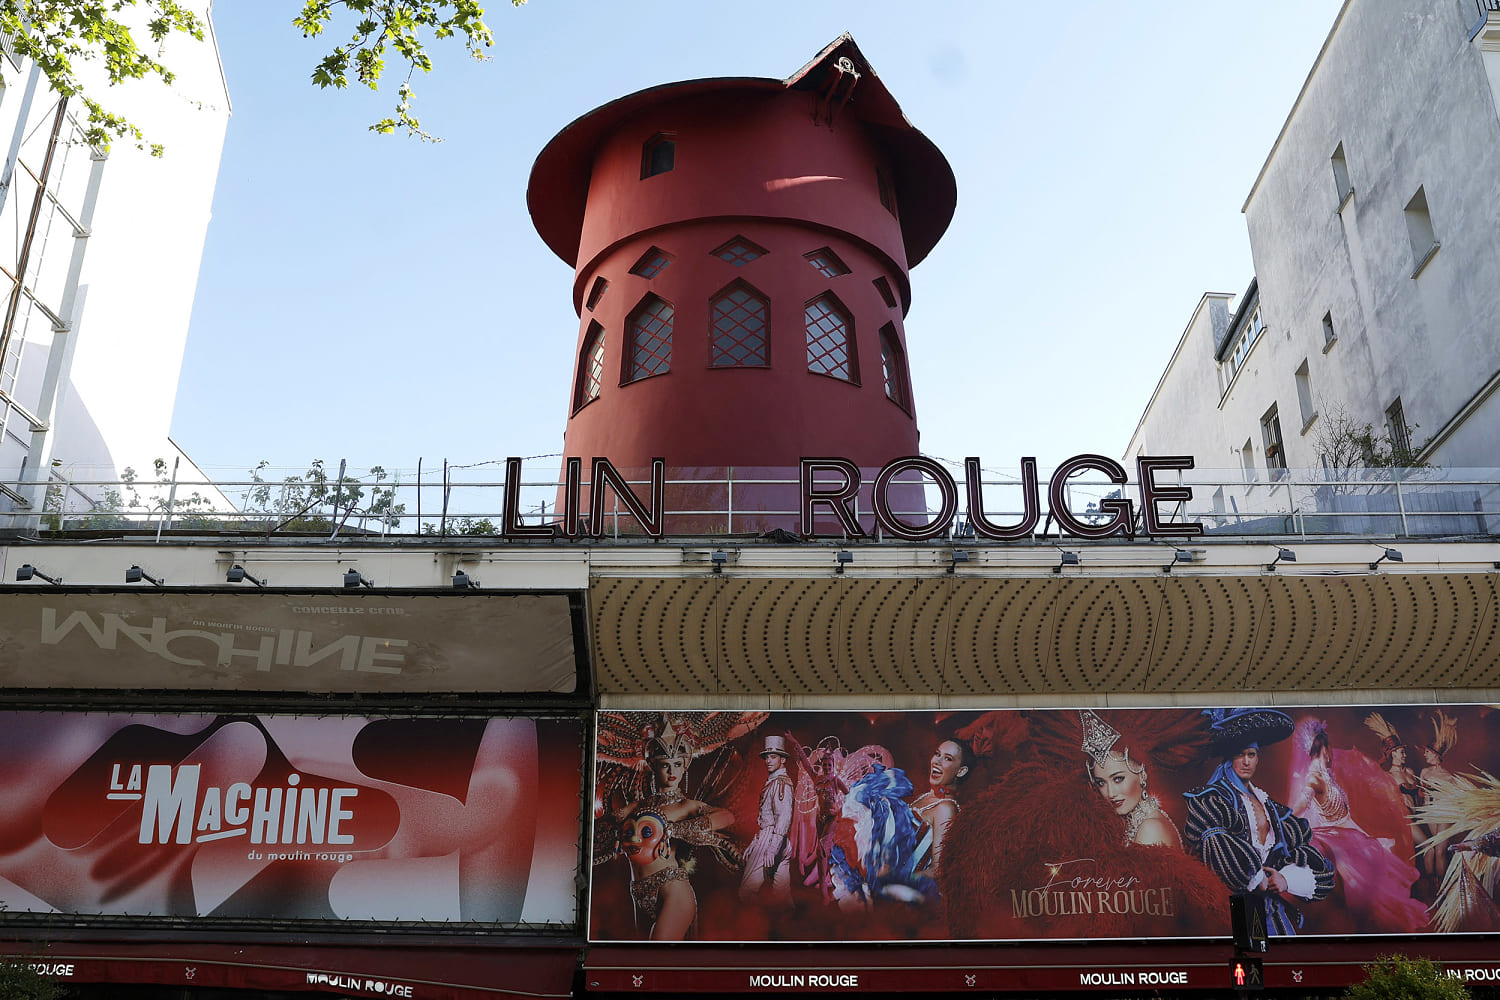 Windmill sails fall from iconic Paris cabaret club Moulin Rouge